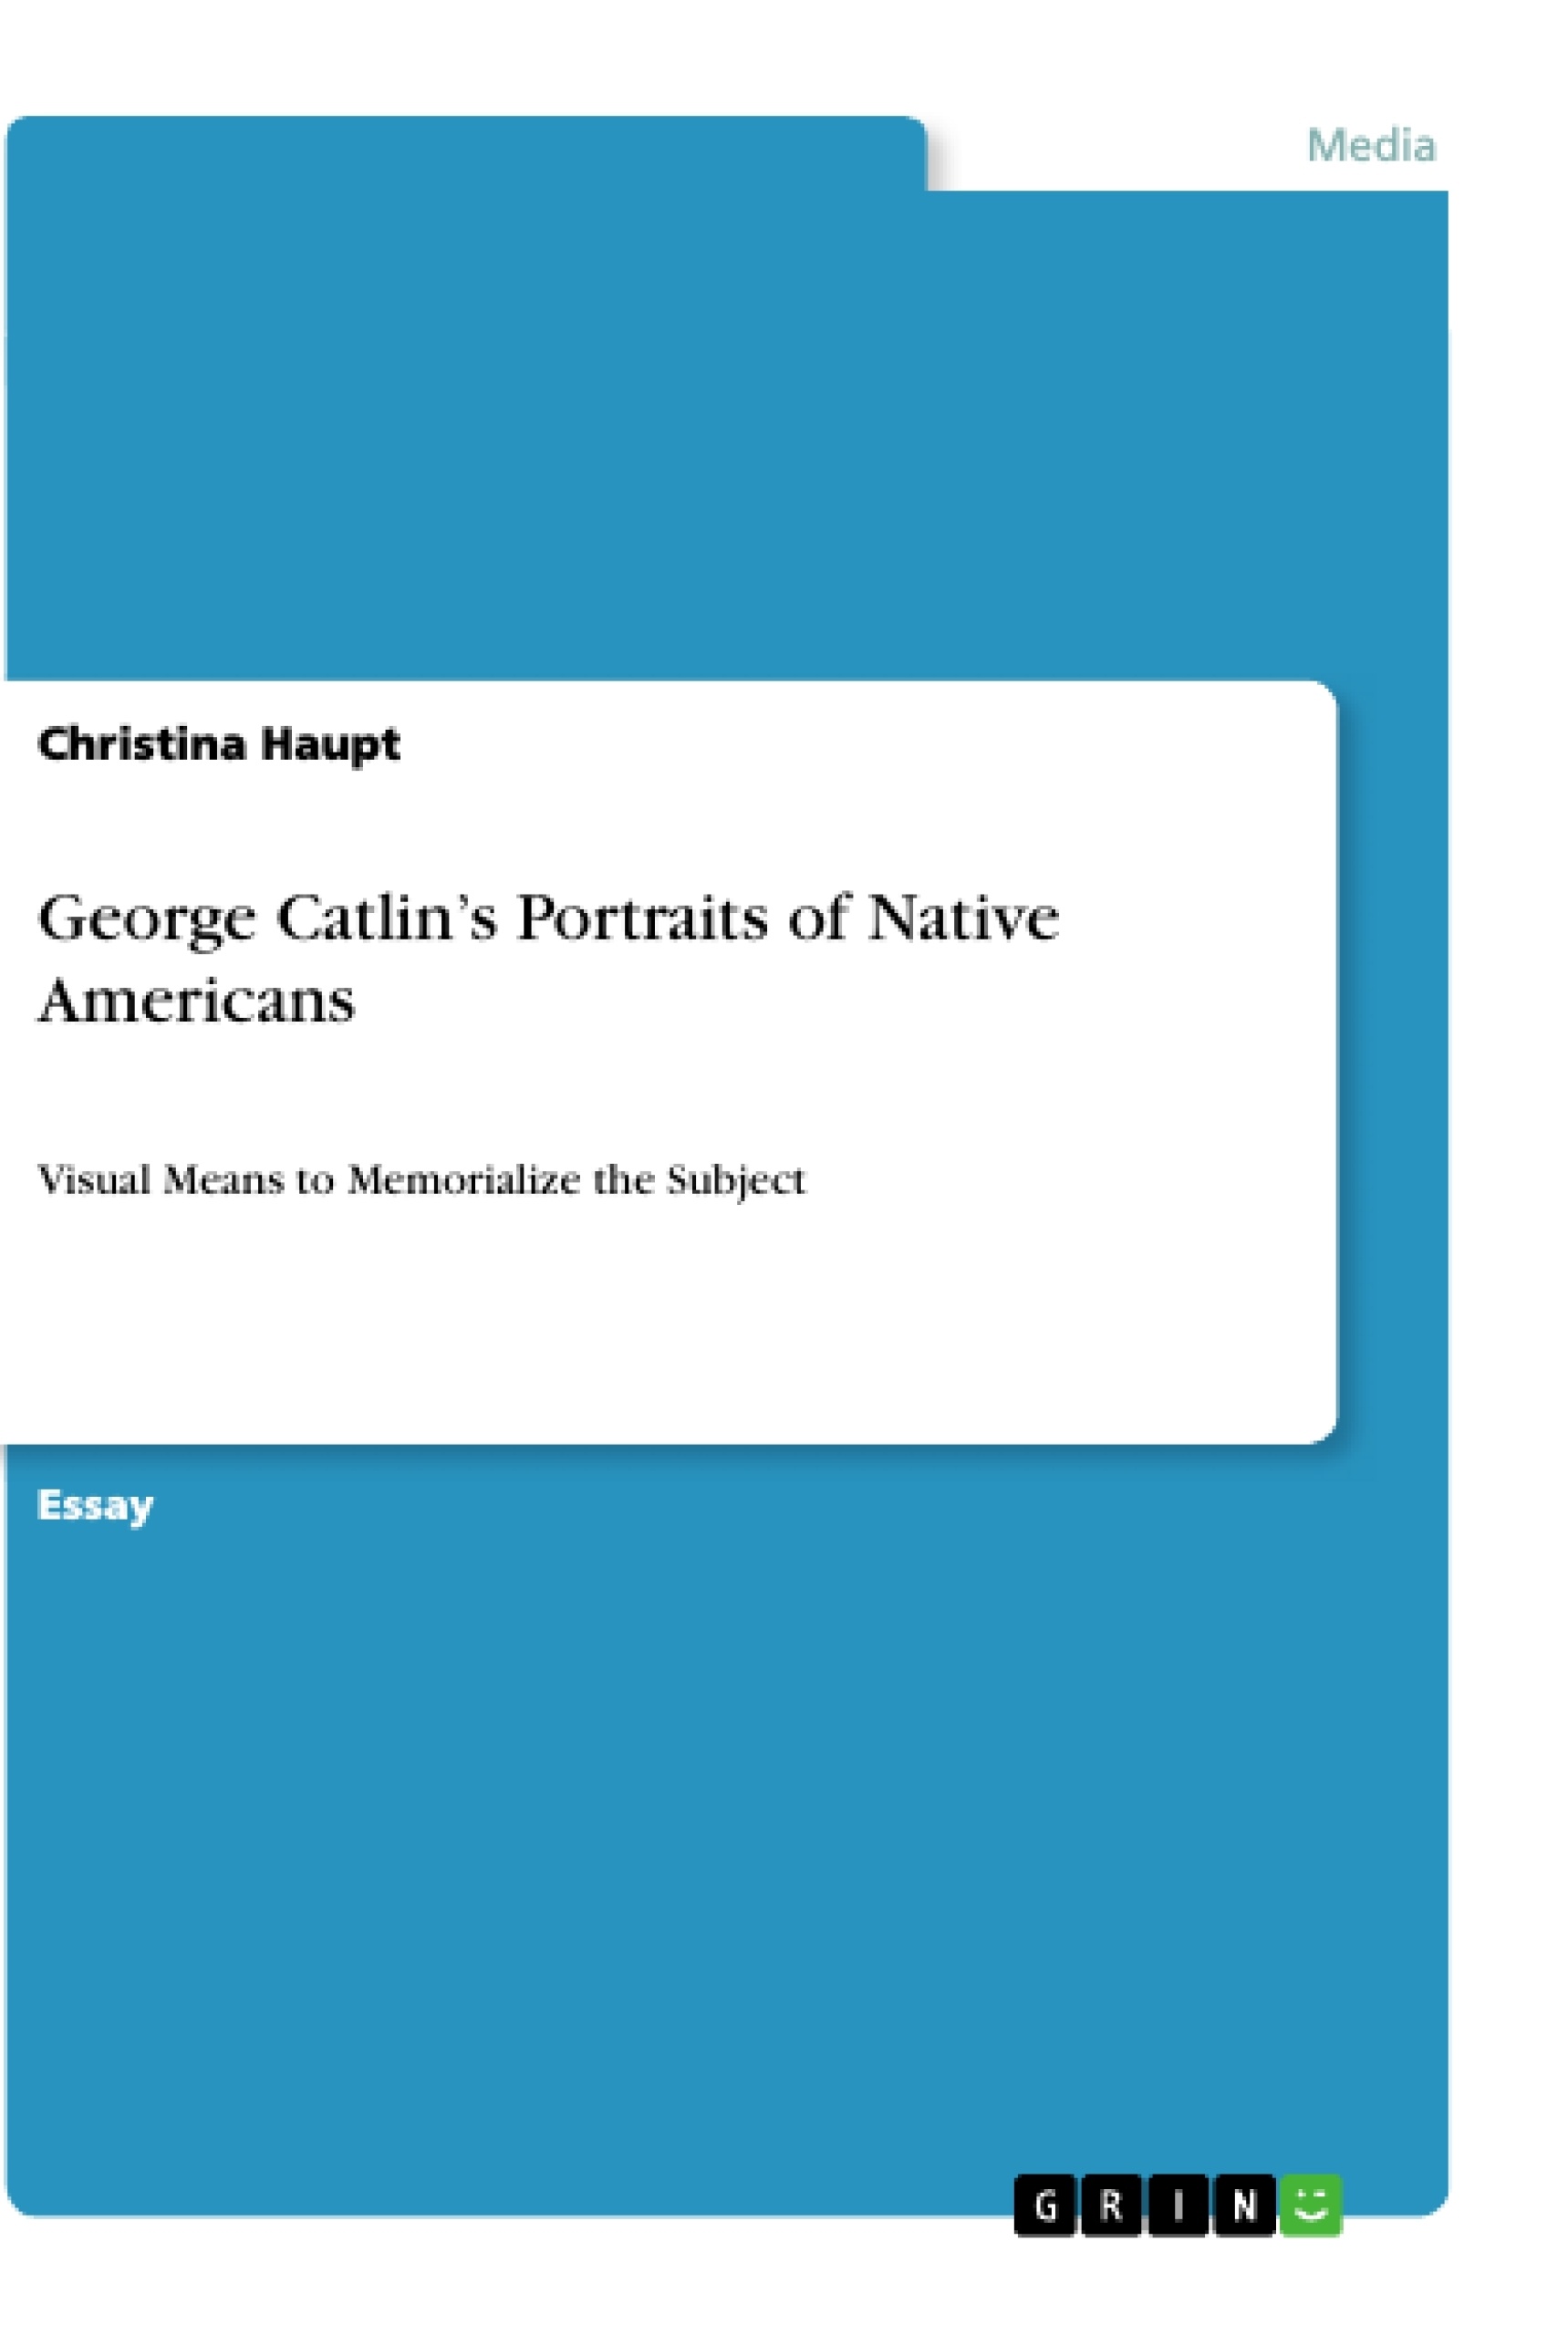 Title: George Catlin’s Portraits of Native Americans